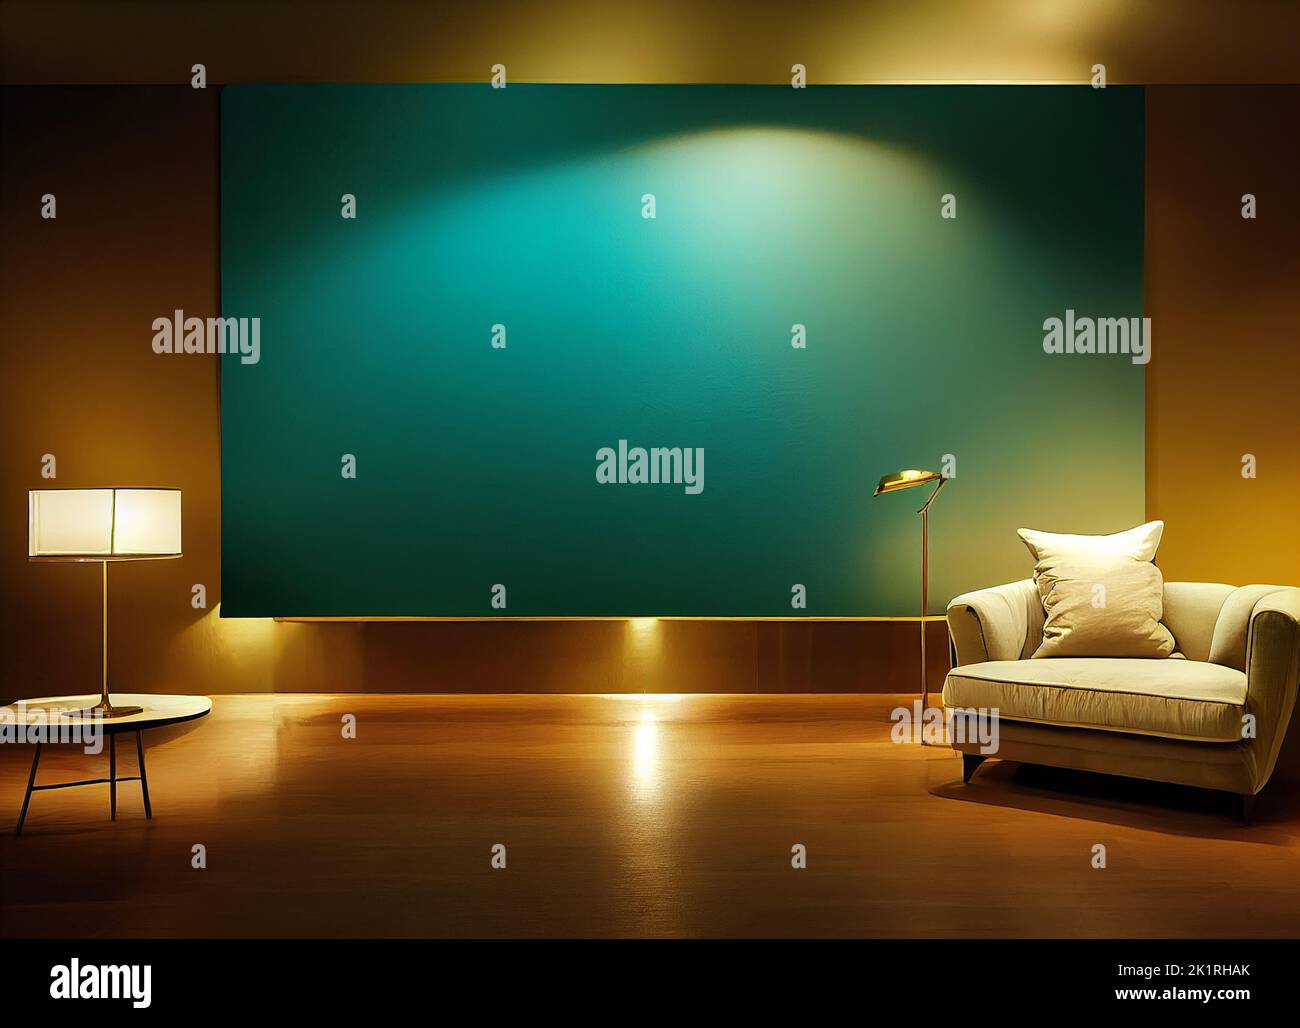 Simple and Luxury Interior in teal and golden style - Digital Generate Image Stock Photo